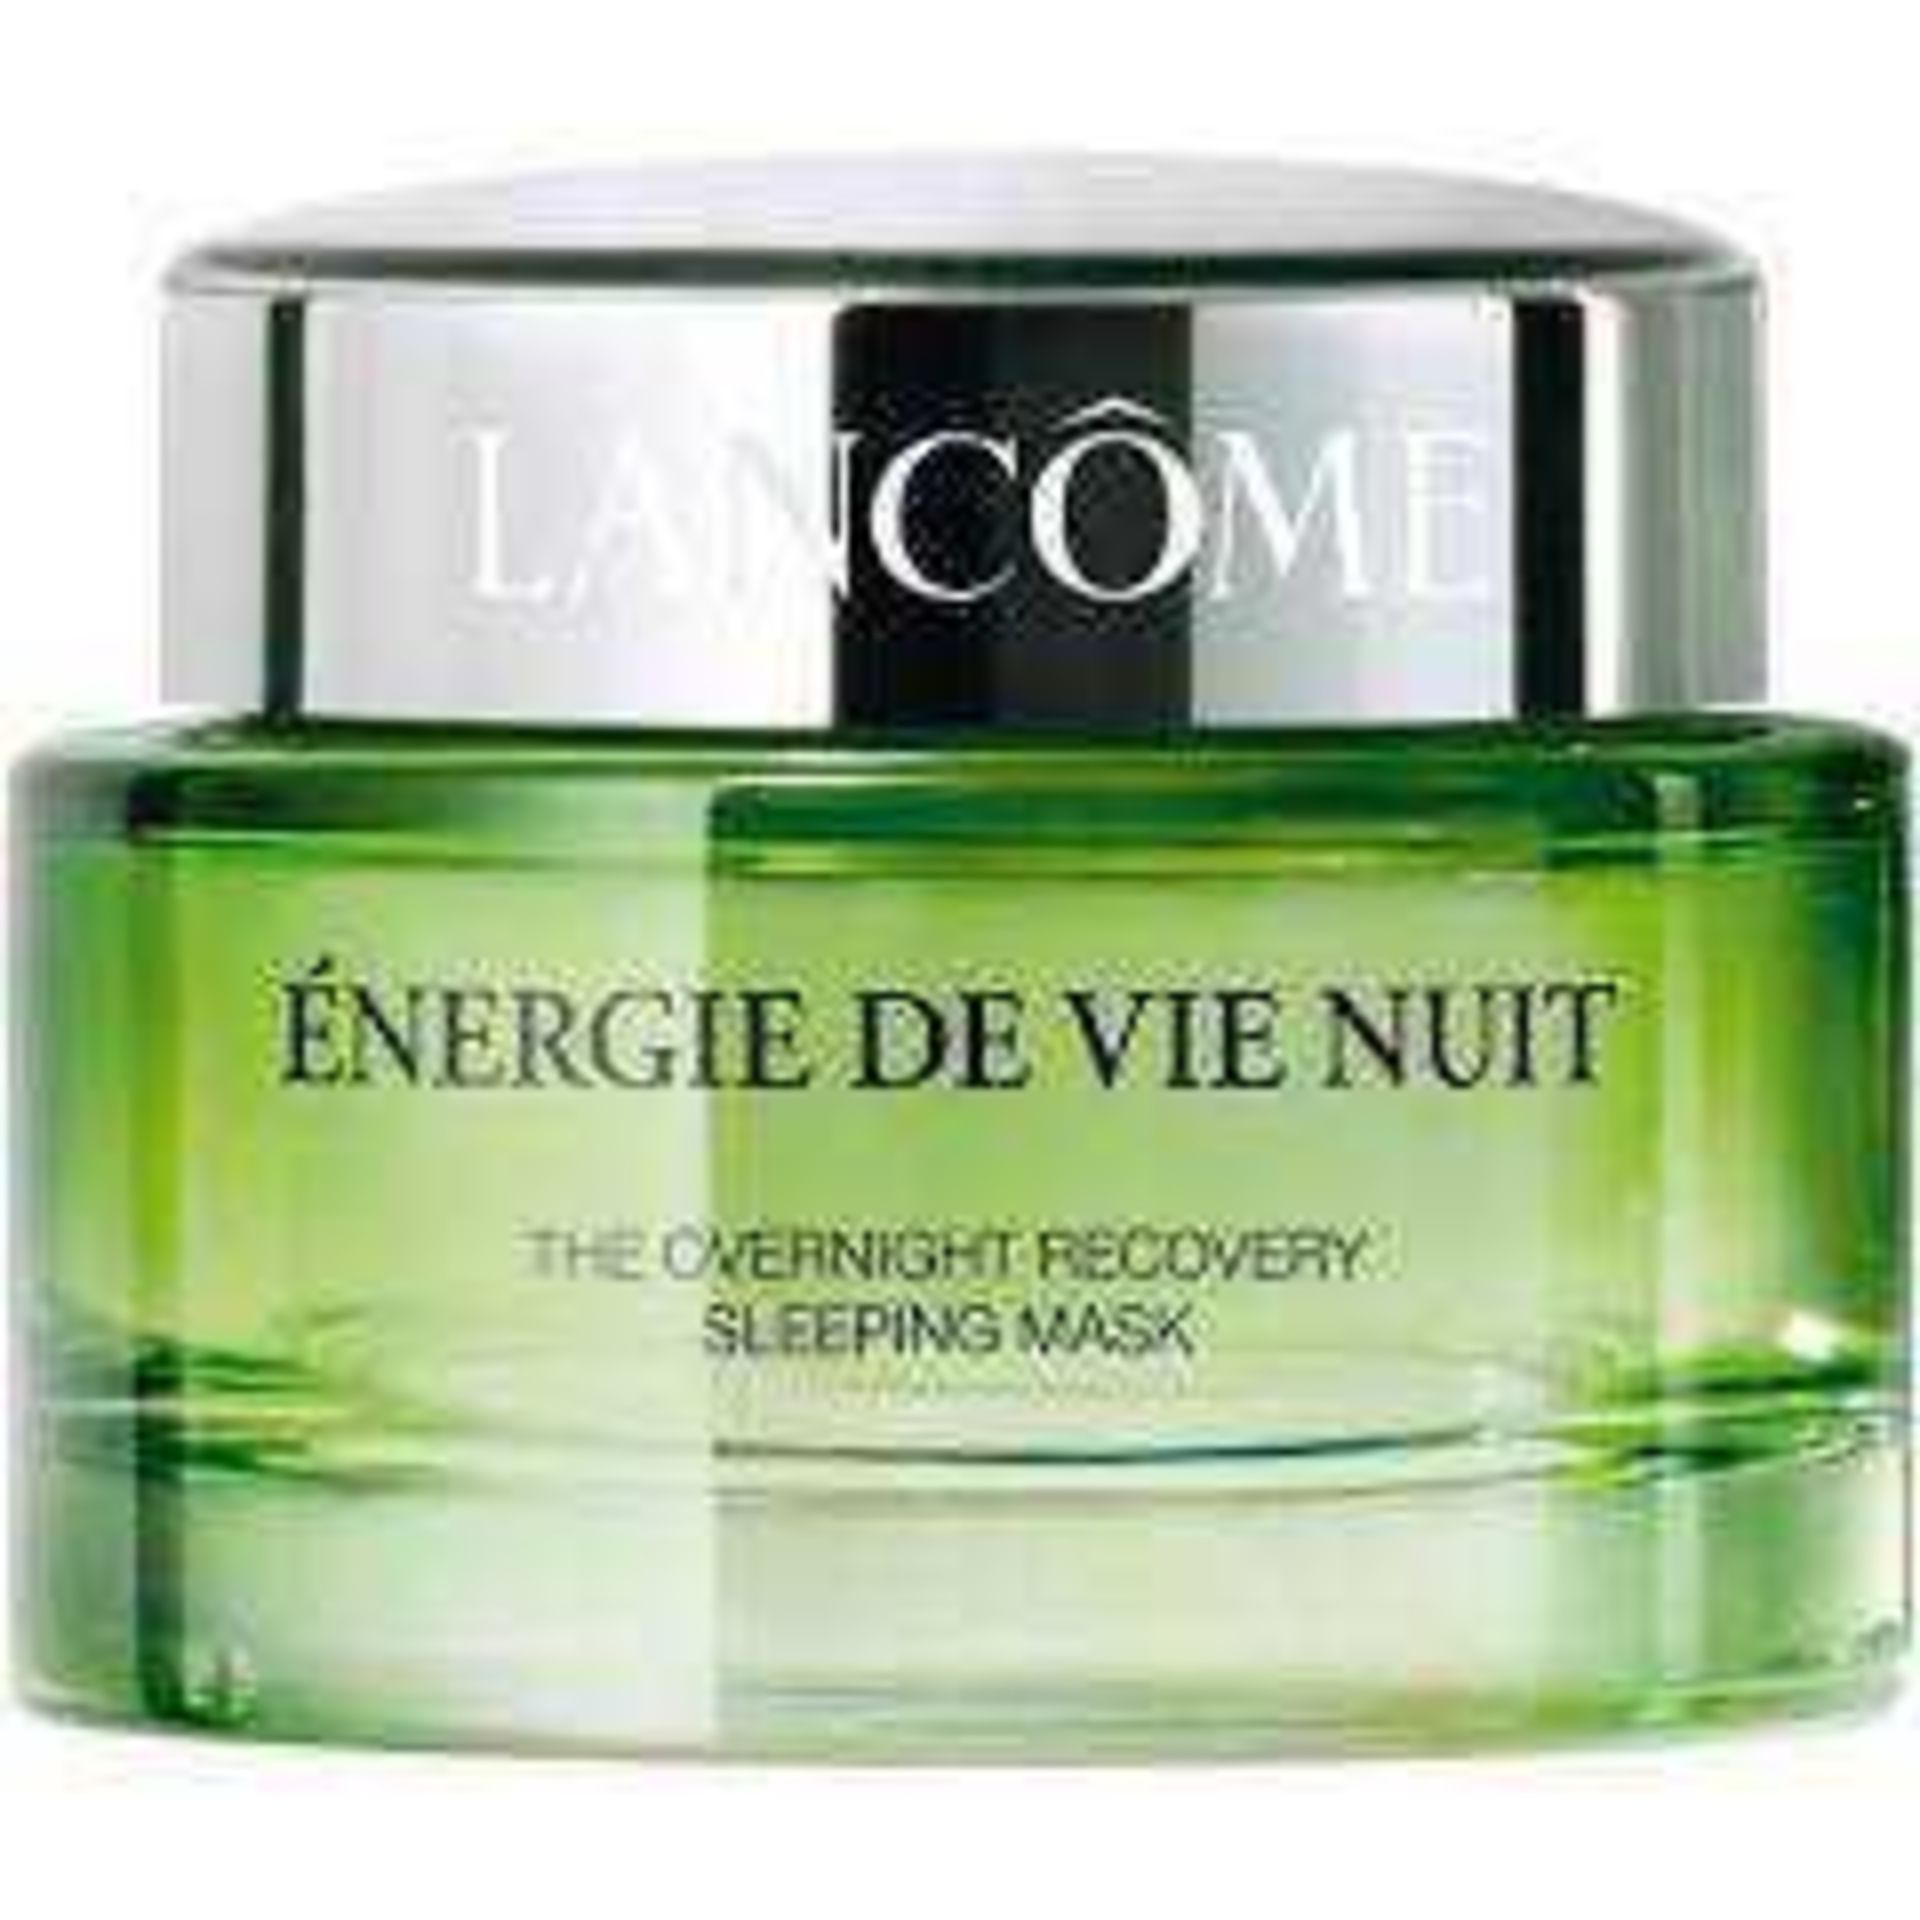 Combined RRP £135 Lot To Contain 3 Unboxed Unused Ex-Display Tester Tubs Of Lancome Energie De Vie N